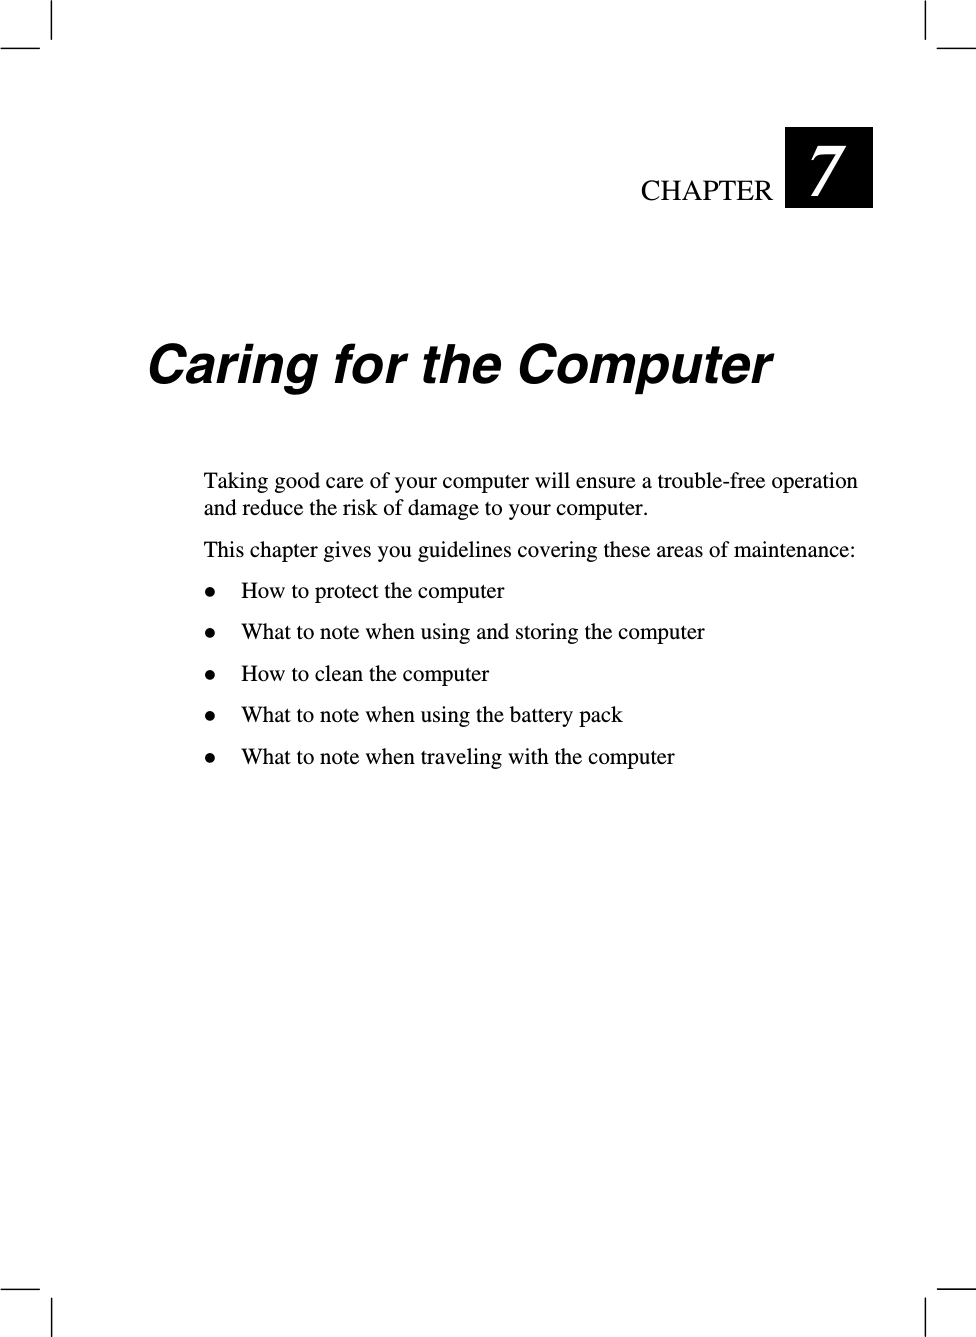 CHAPTER  7 Caring for the ComputerTaking good care of your computer will ensure a trouble-free operationand reduce the risk of damage to your computer.This chapter gives you guidelines covering these areas of maintenance:z How to protect the computerz What to note when using and storing the computerz How to clean the computerz What to note when using the battery packz What to note when traveling with the computer